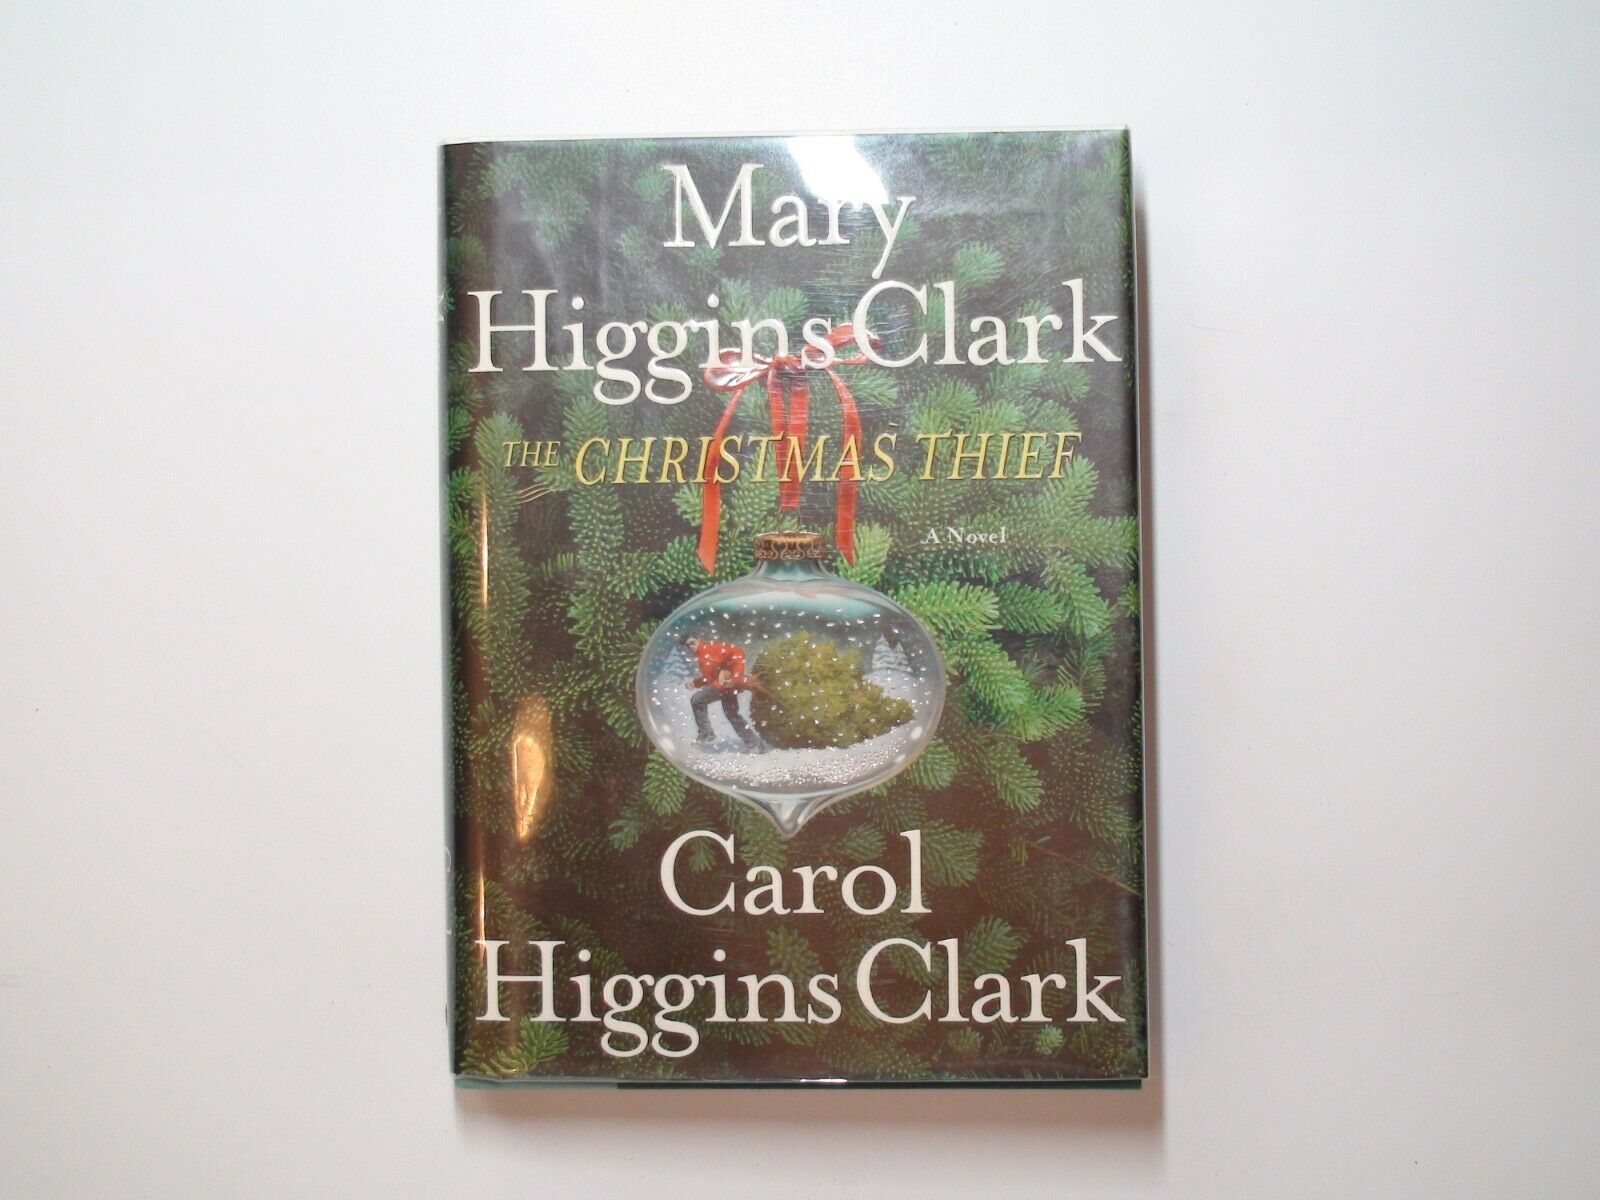 The Christmas Thief, SIGNED by Mary Higgins Clark and Carol Higgins Clark, 2004